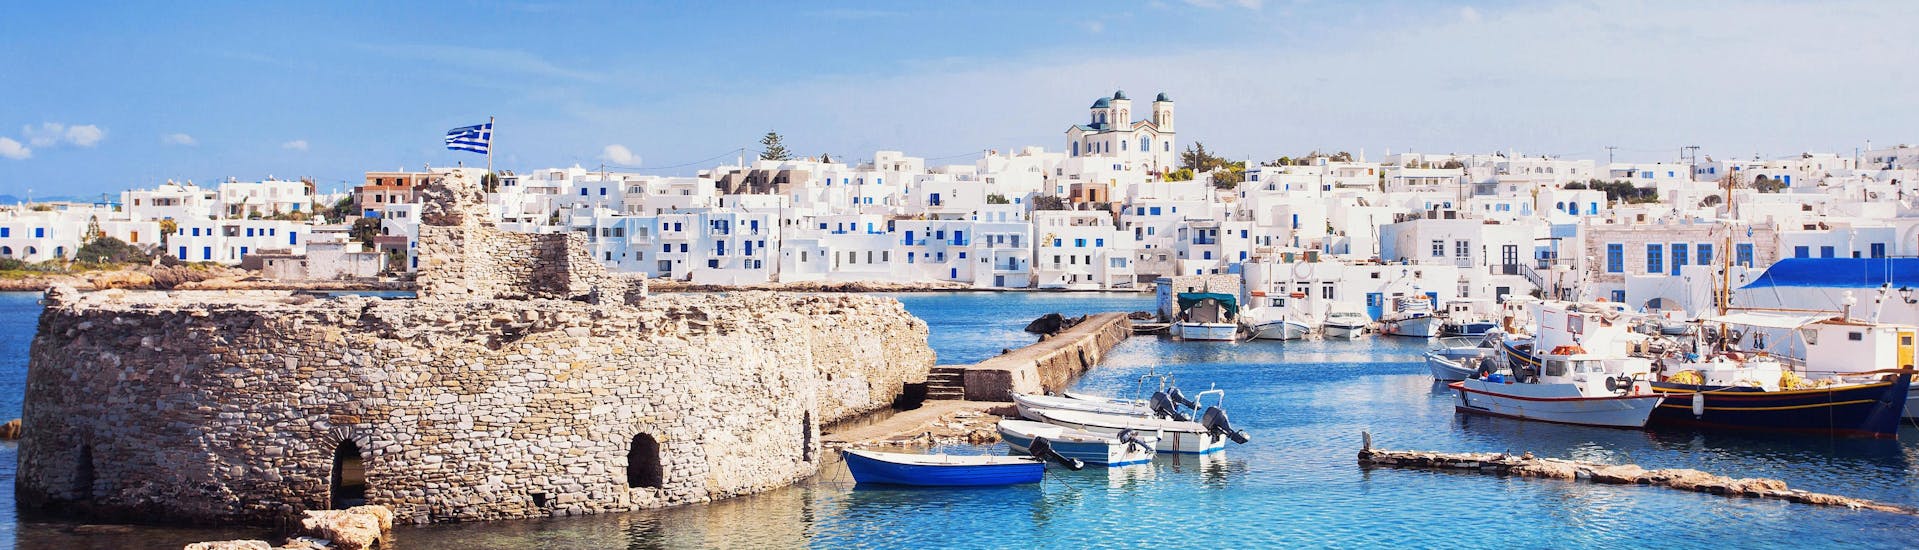 Beautiful view of the characteristic white houses lining the coasts of Cyclades, Greece, a popular destination for boat trips.